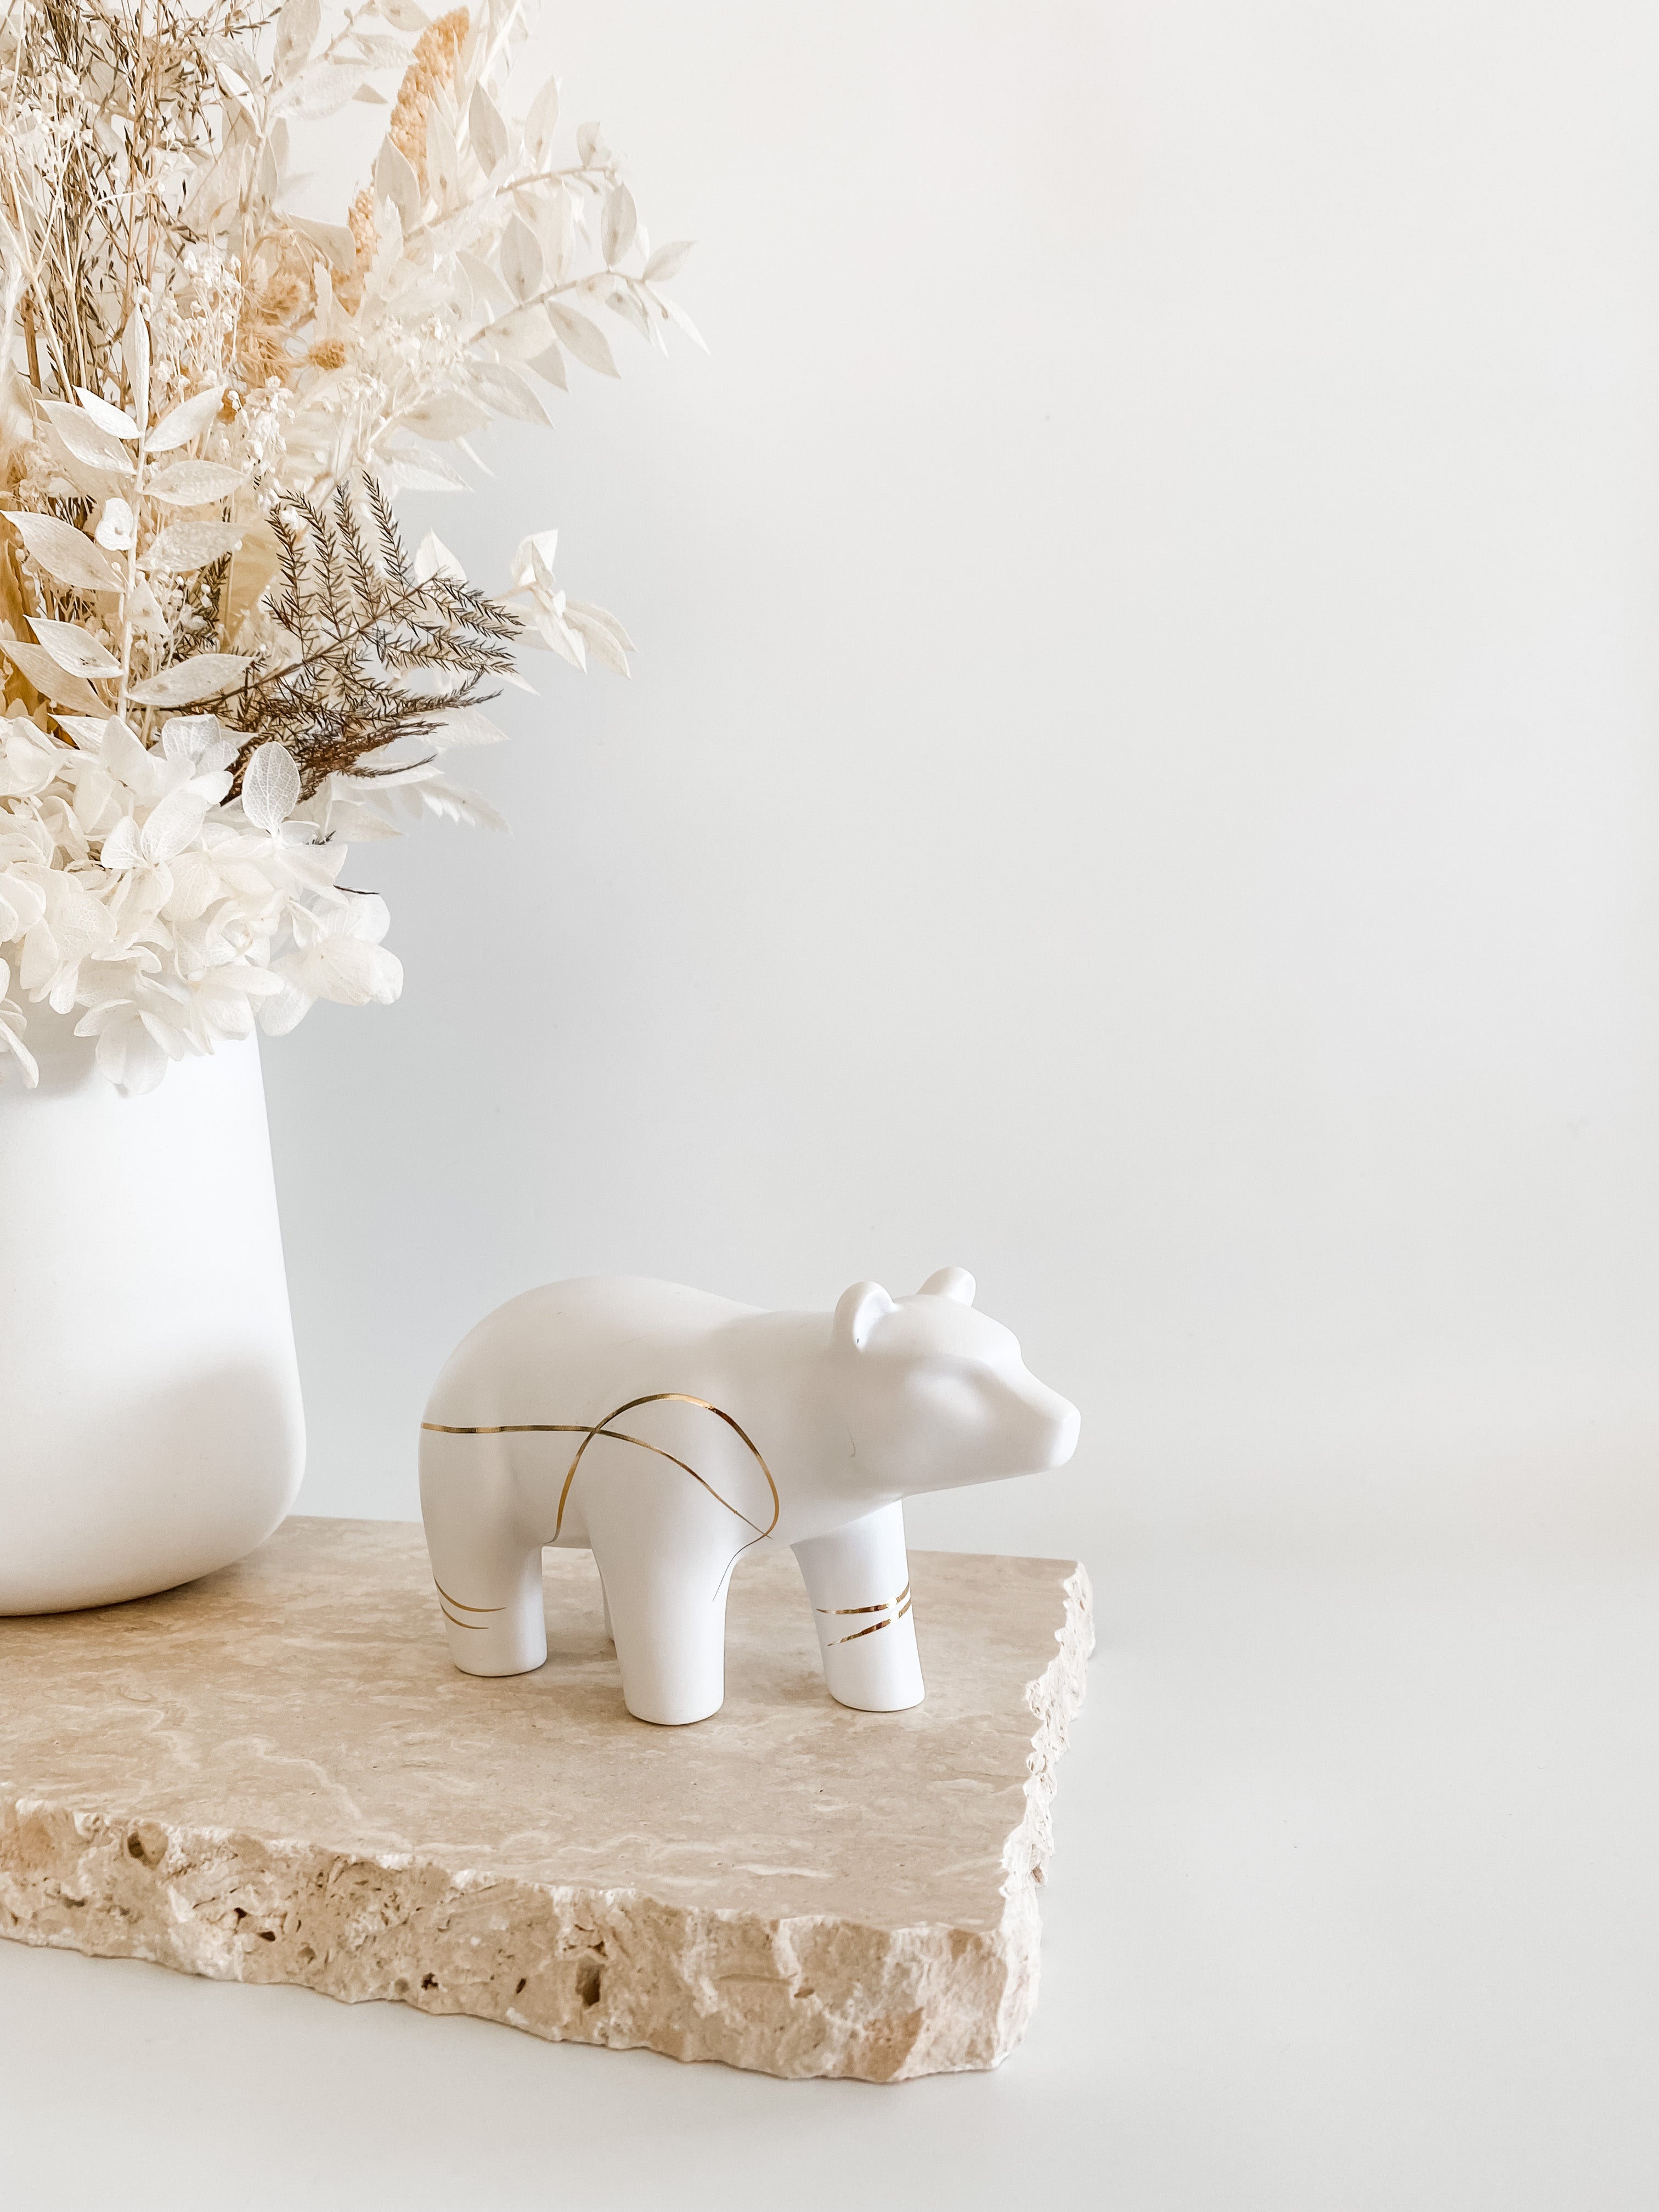 a white vase with flowers and a white bear figurine